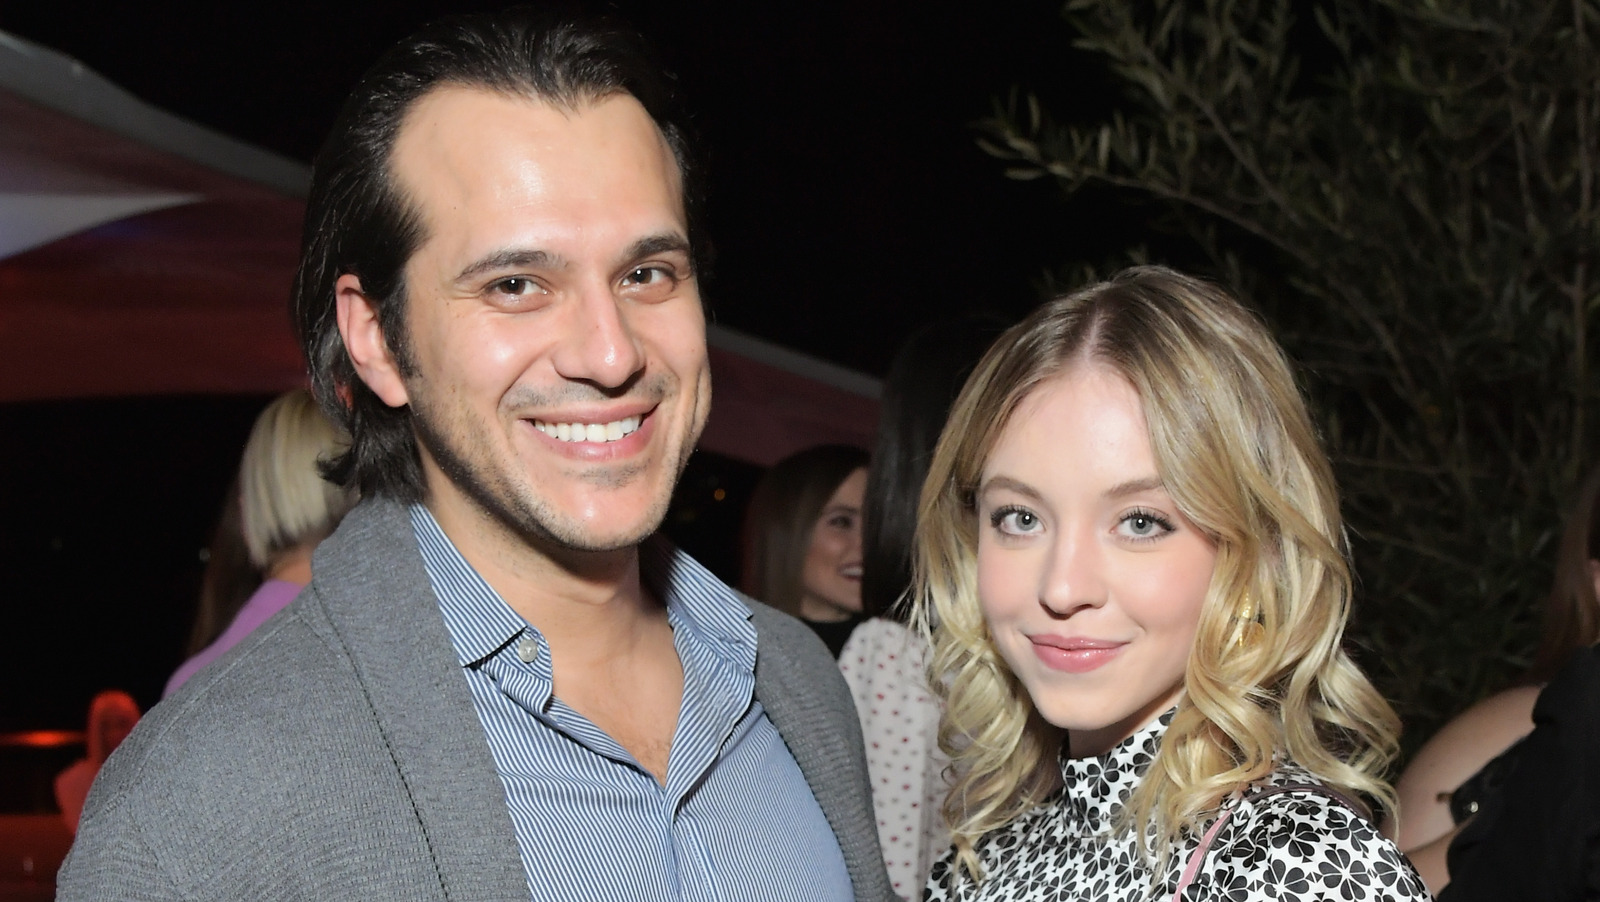 Why Sydney Sweeney Is So Secretive About Her Relationship With Jonathan Davino